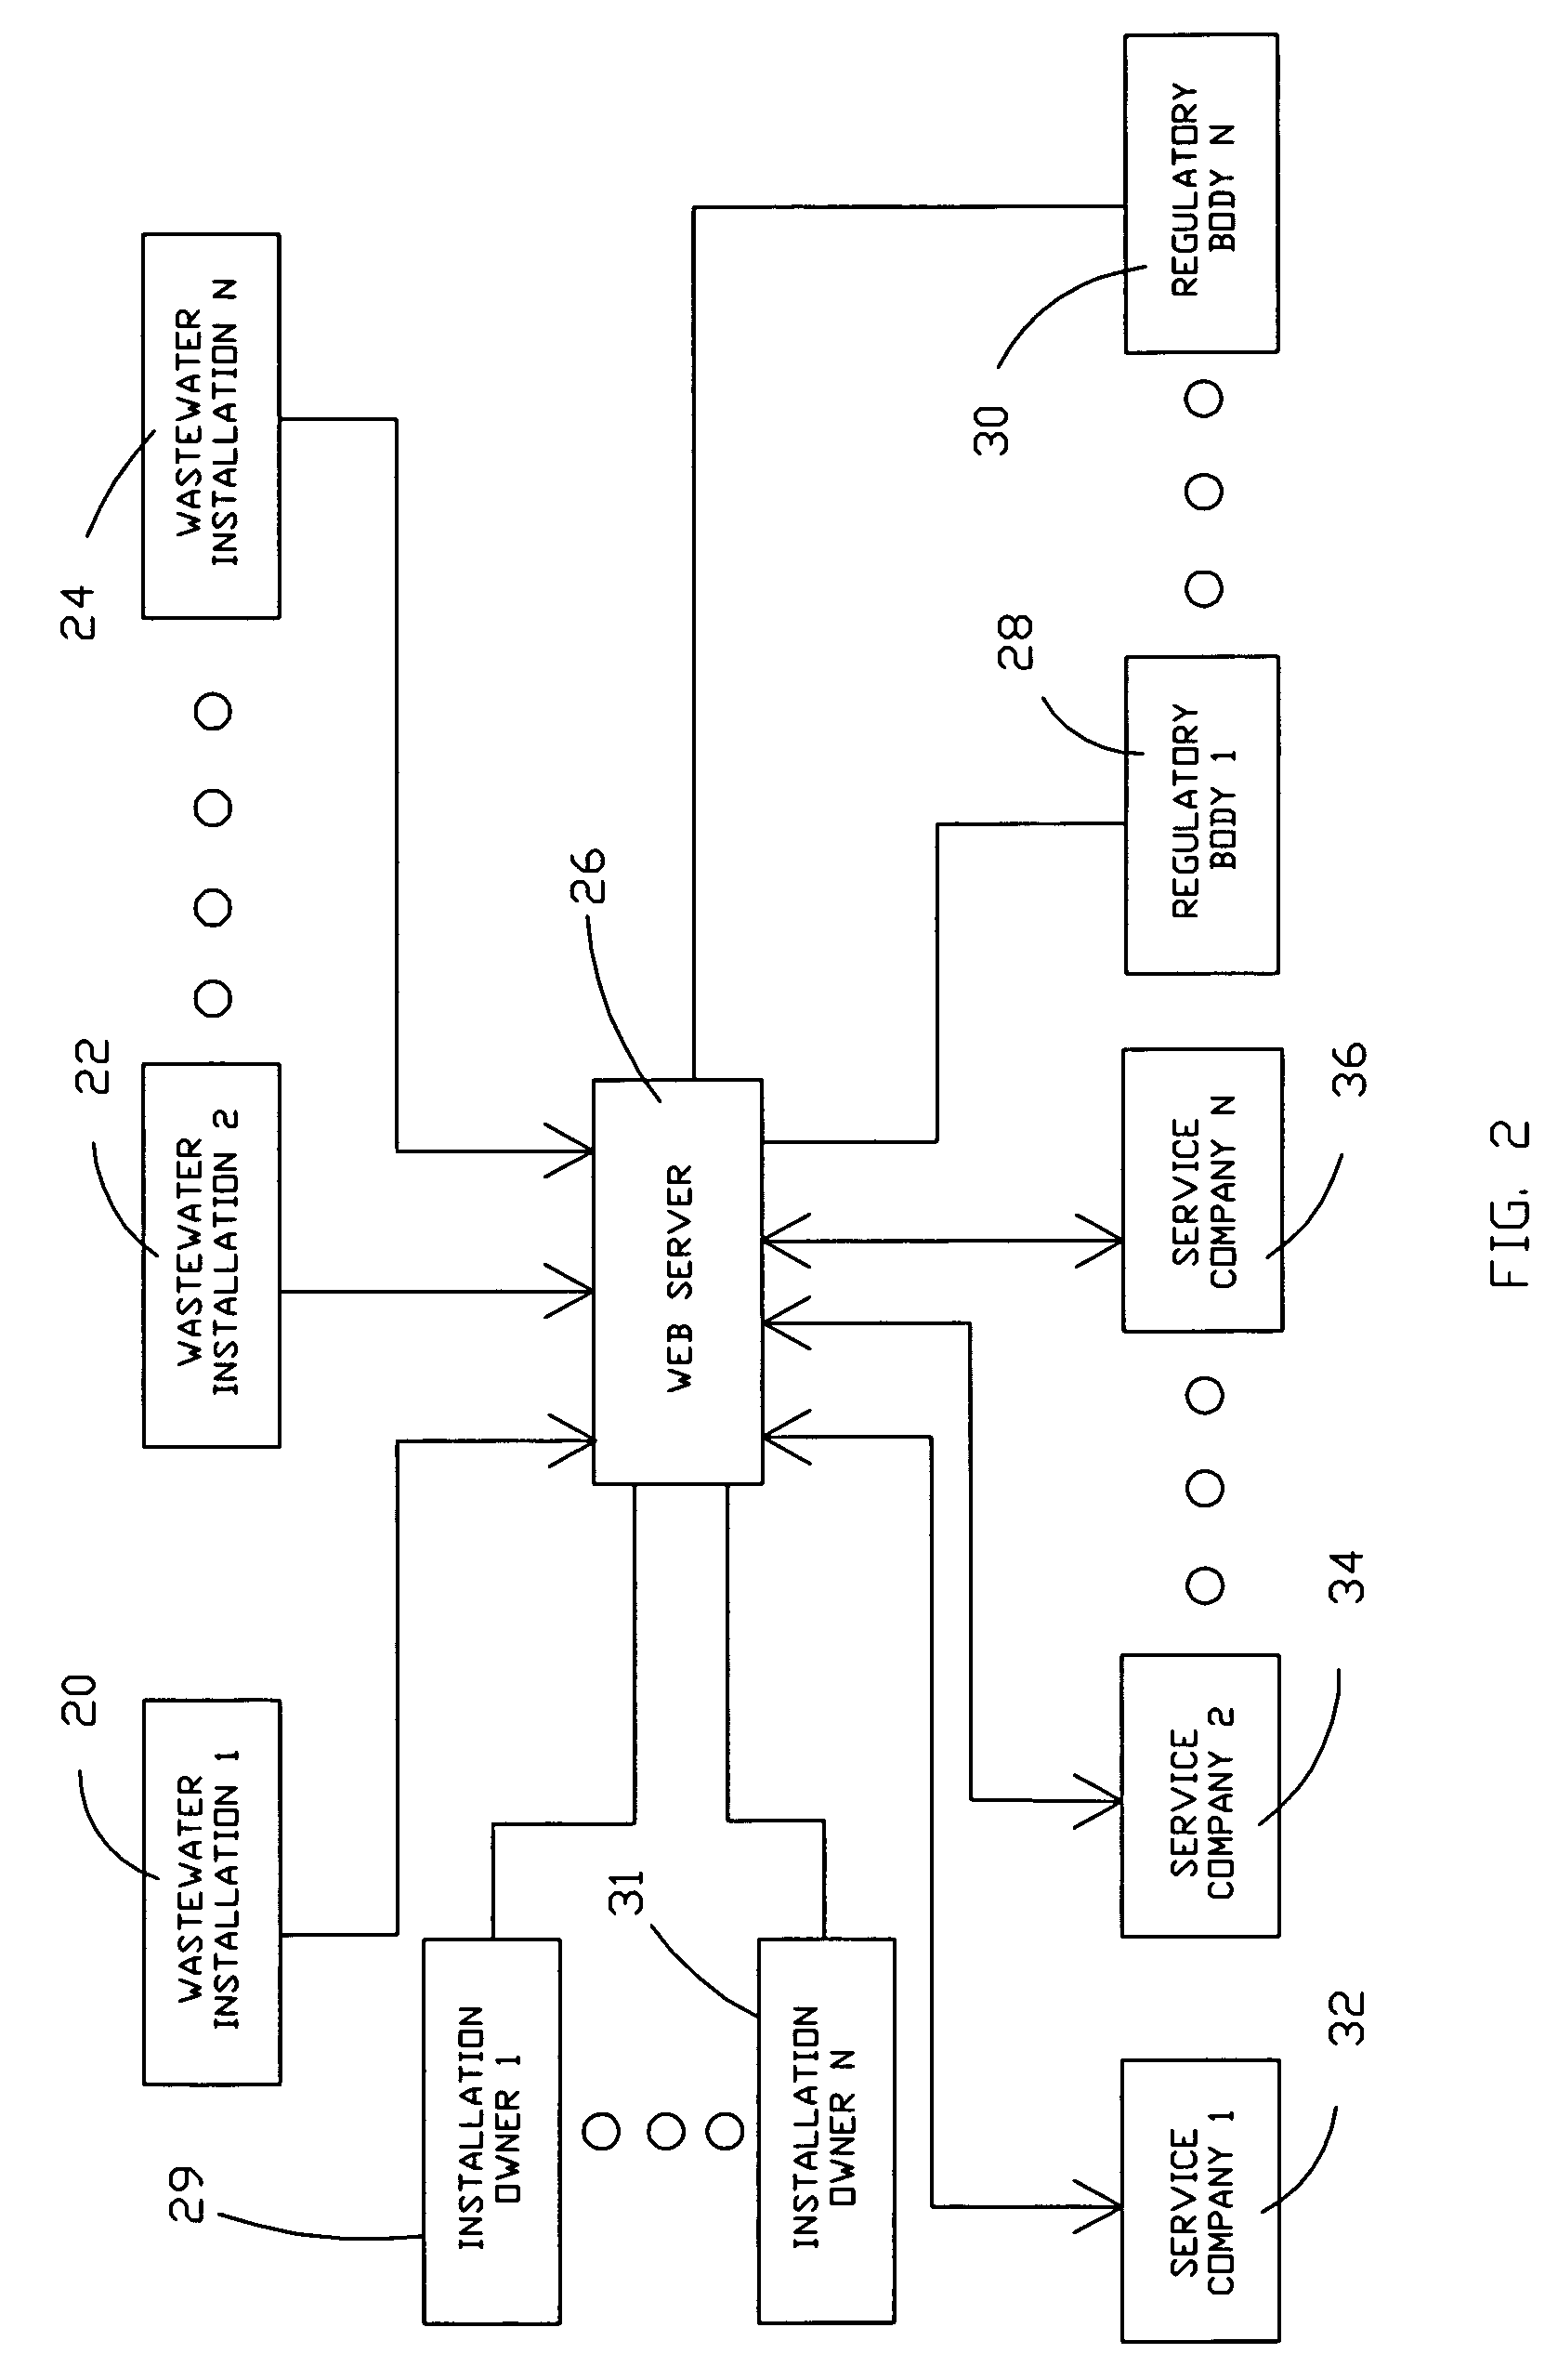 Sparse data environmental equipment threshold compliance alarm system and method